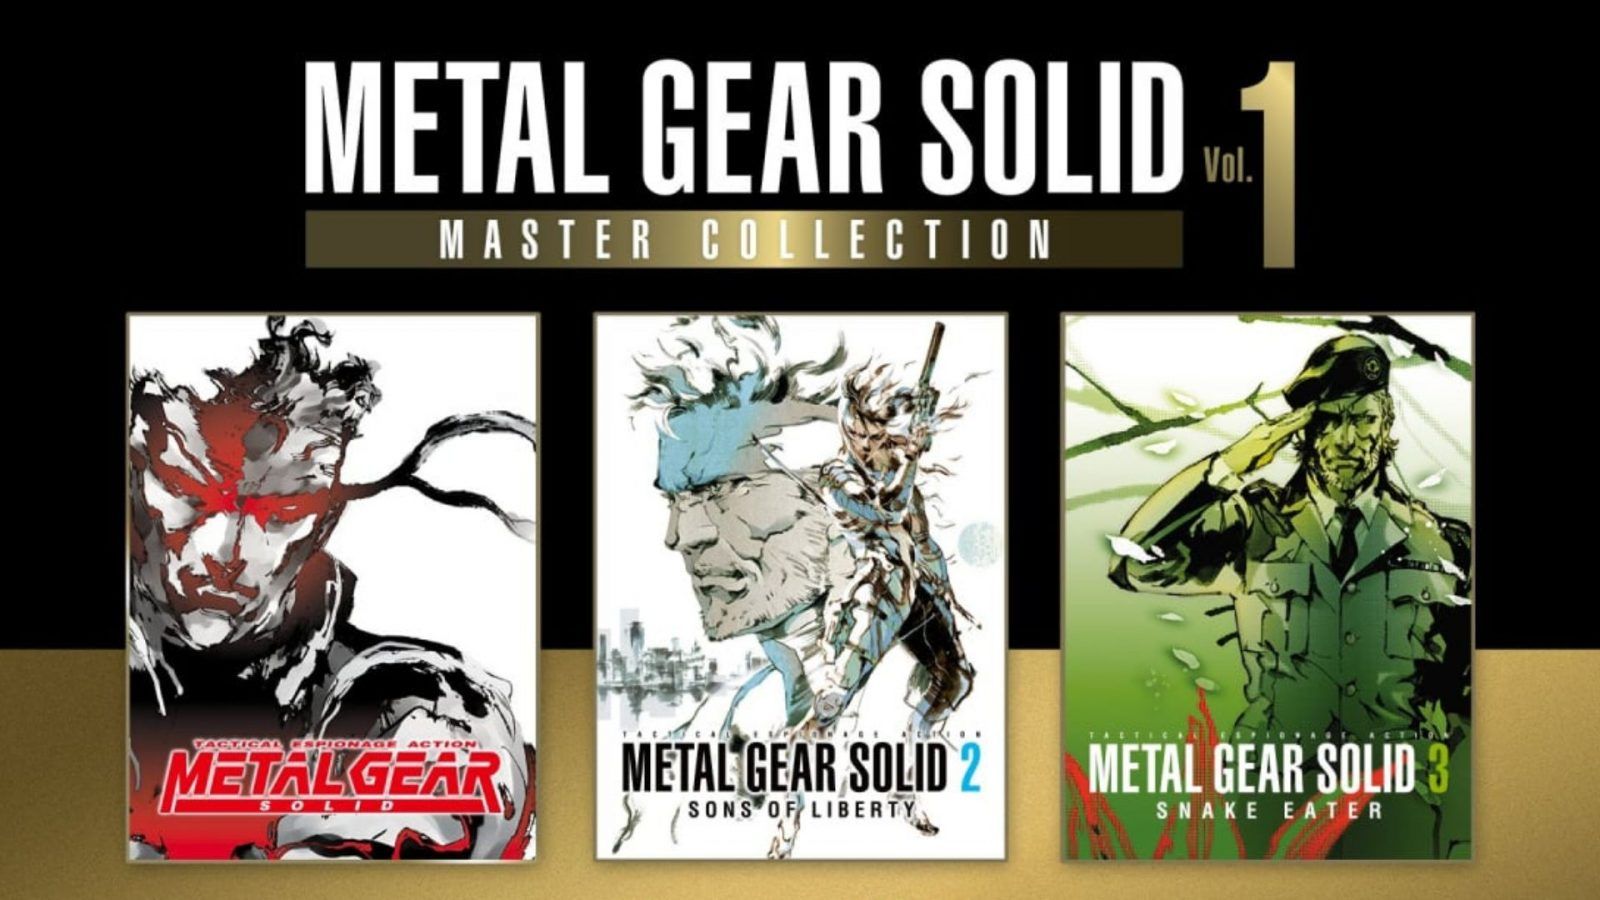 Metal Gear Solid: Master Collection Vol. 1 has two unannounced games Metal Gear Solid collection boxart